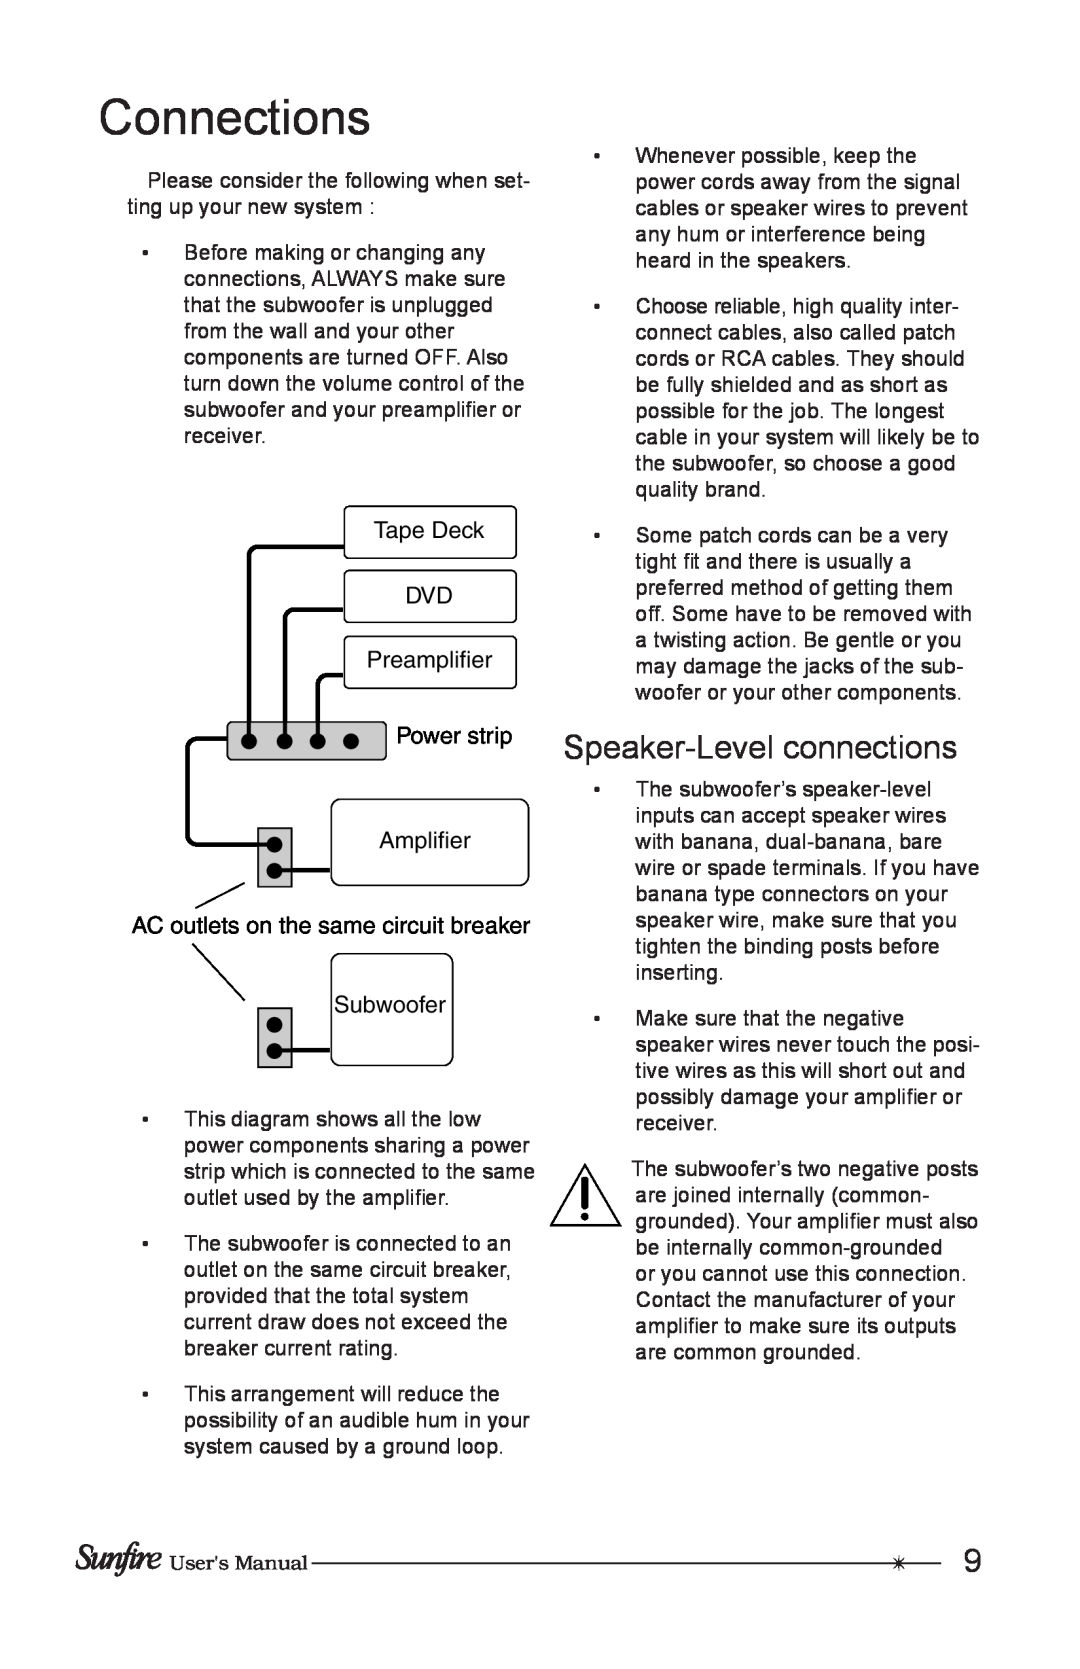 Sunfire Home Theater System manual Connections, Speaker-Levelconnections 